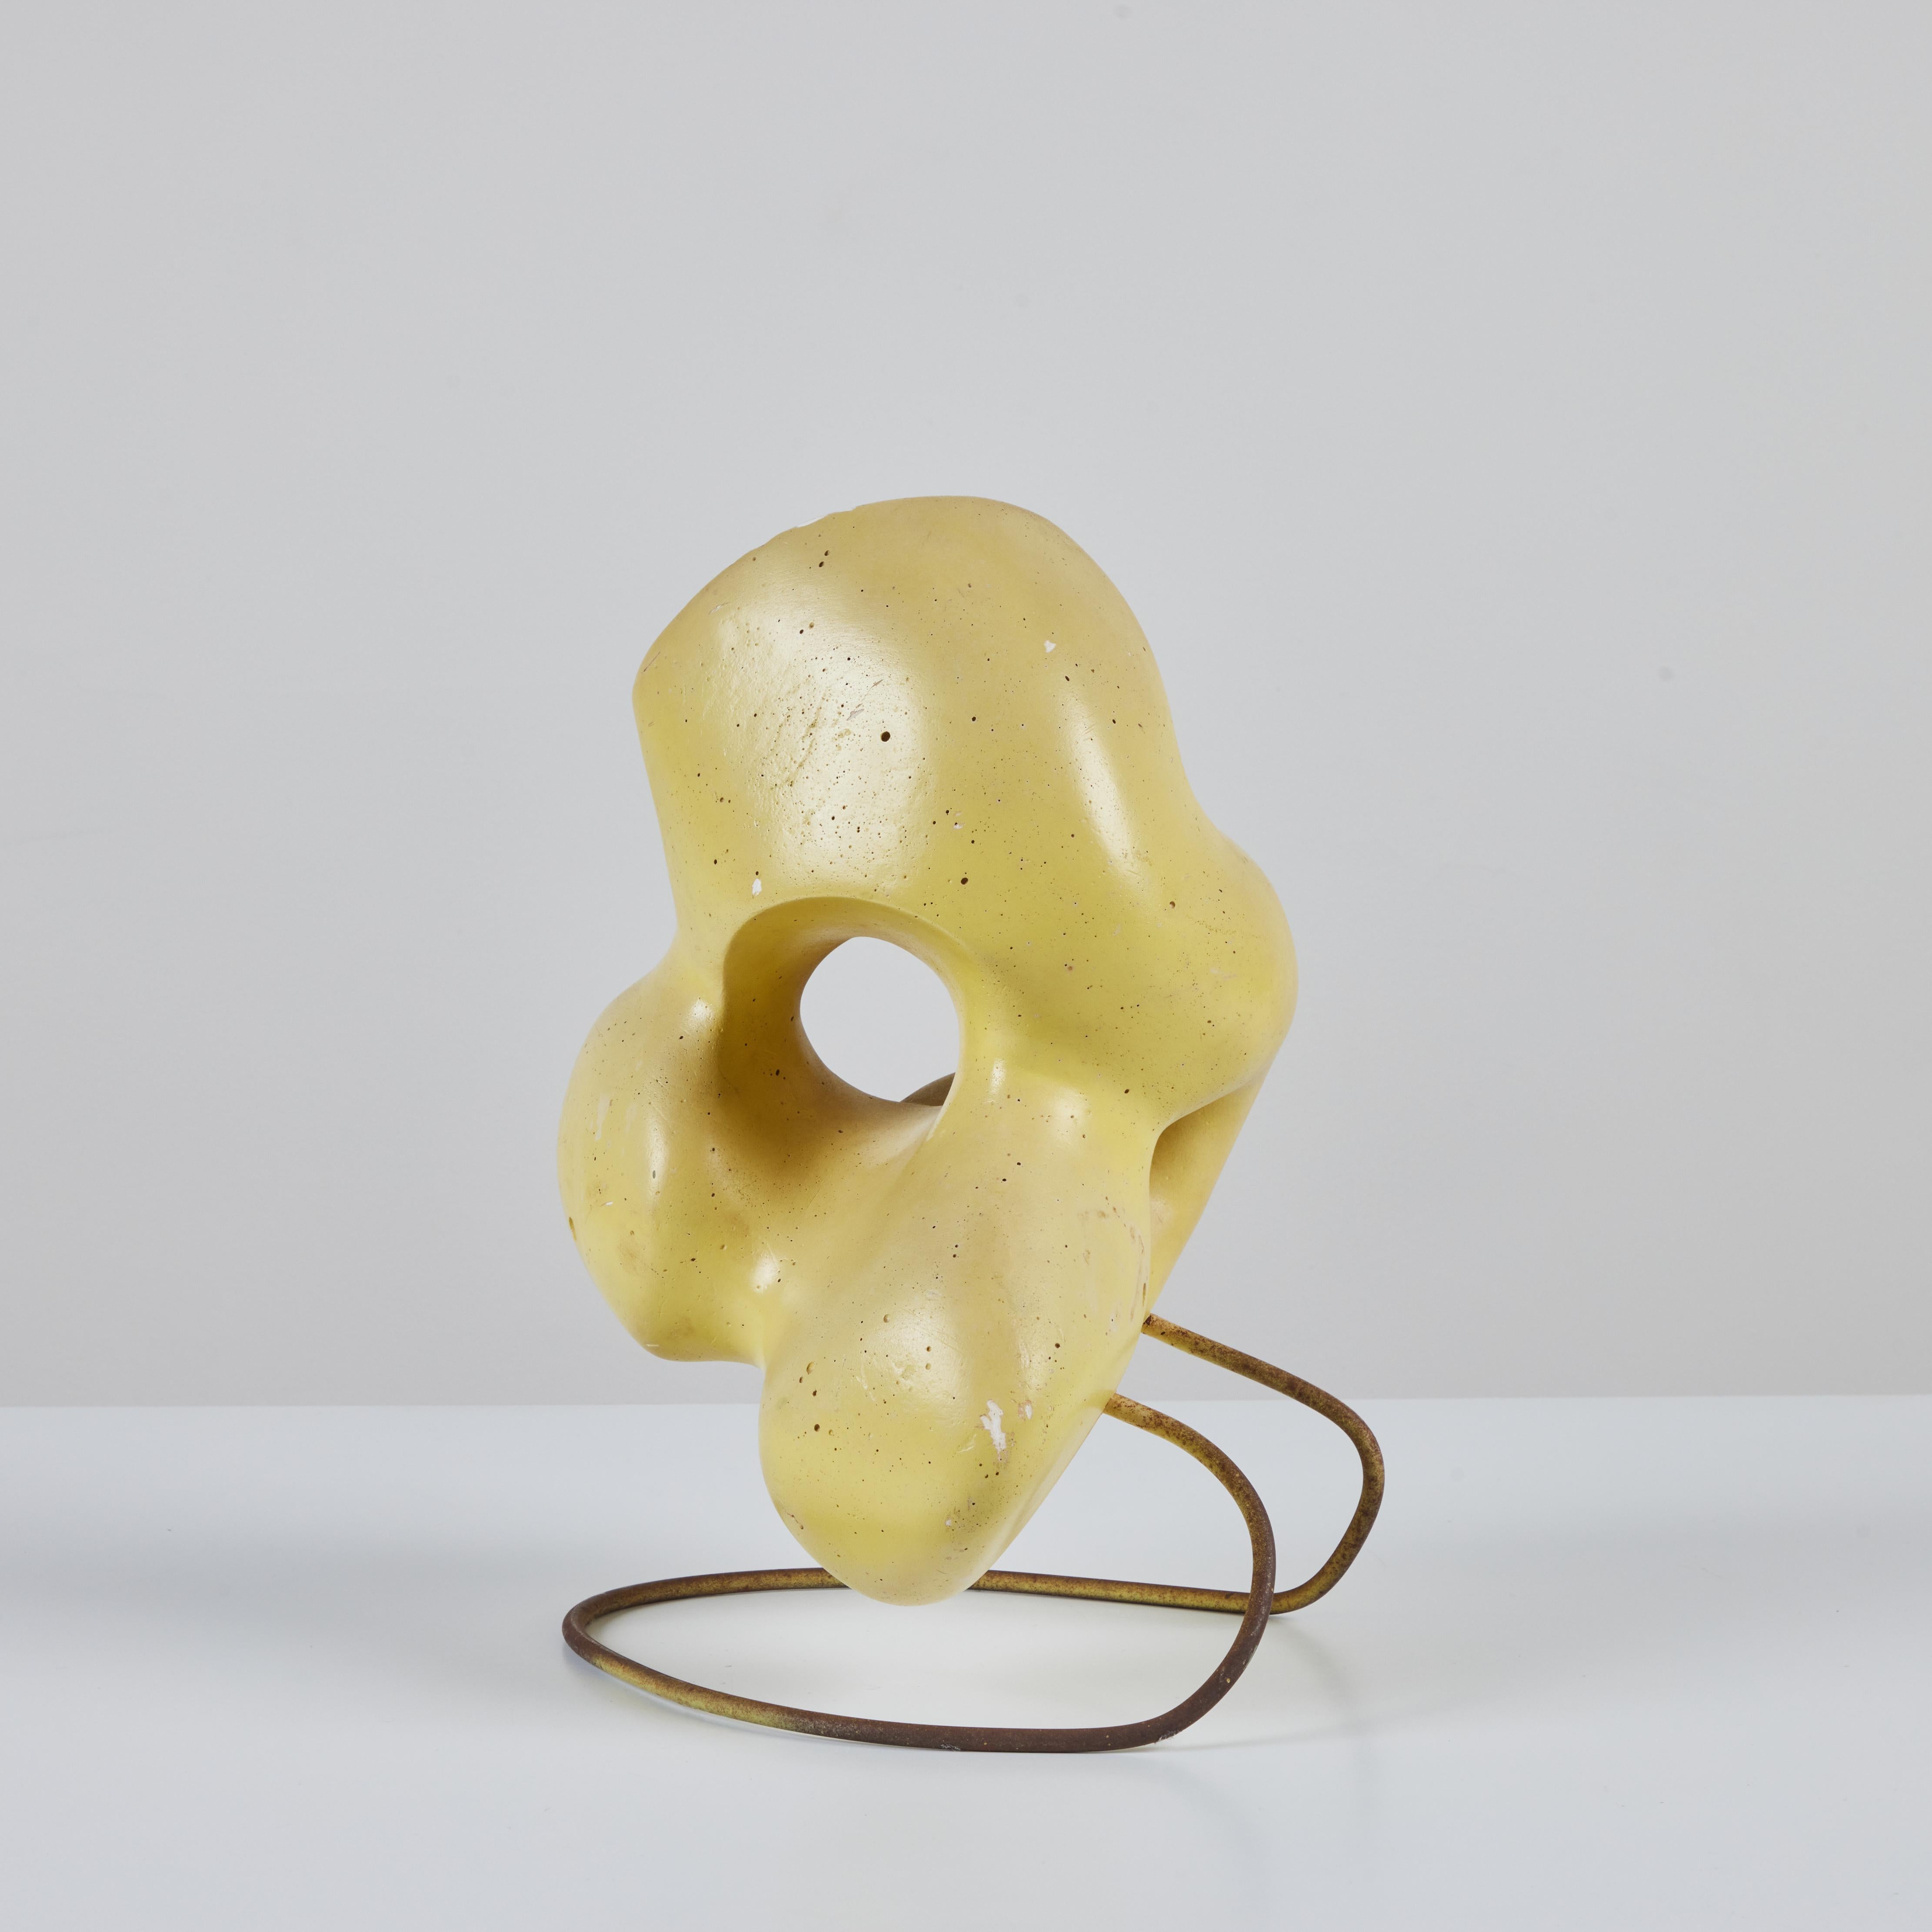 Metal Biomorphic Yellow Glazed Sculpture For Sale